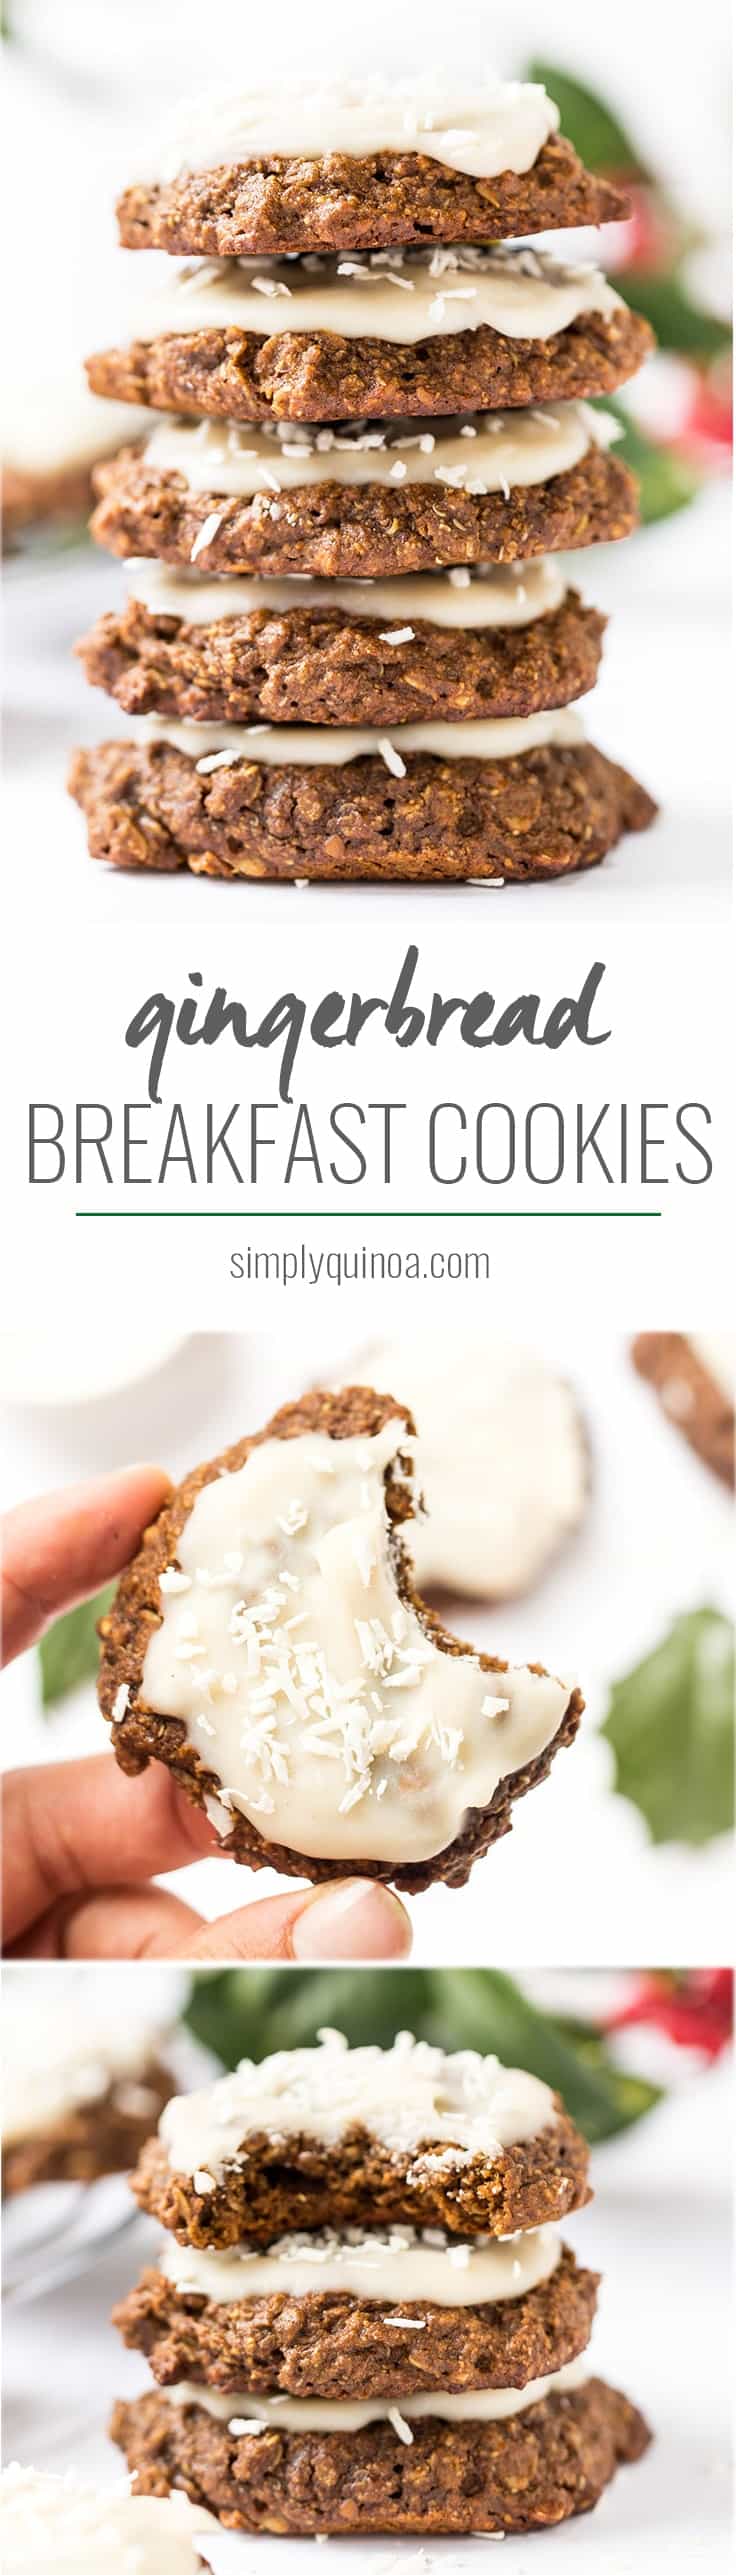 These INCREDIBLE Gingerbread Quinoa Breakfast Cookies has a base of oats, quinoa and banana, but has all the flavors of classic gingerbread. And they're HEALTHY too! [vegan + gf]